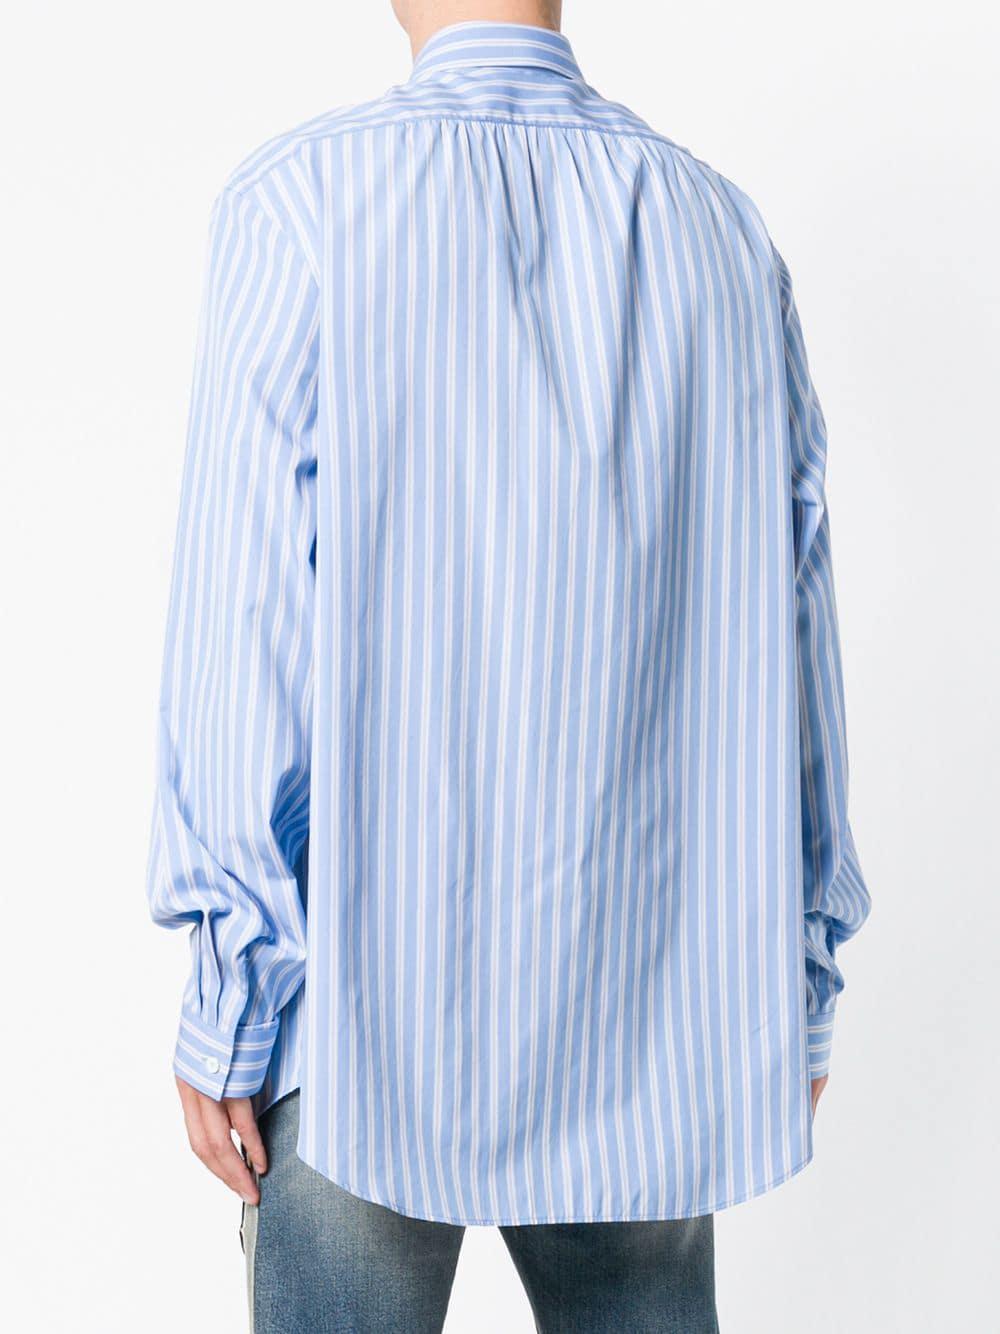 Gucci Cotton Oversized Stripe Print Shirt in Blue for Men - Lyst